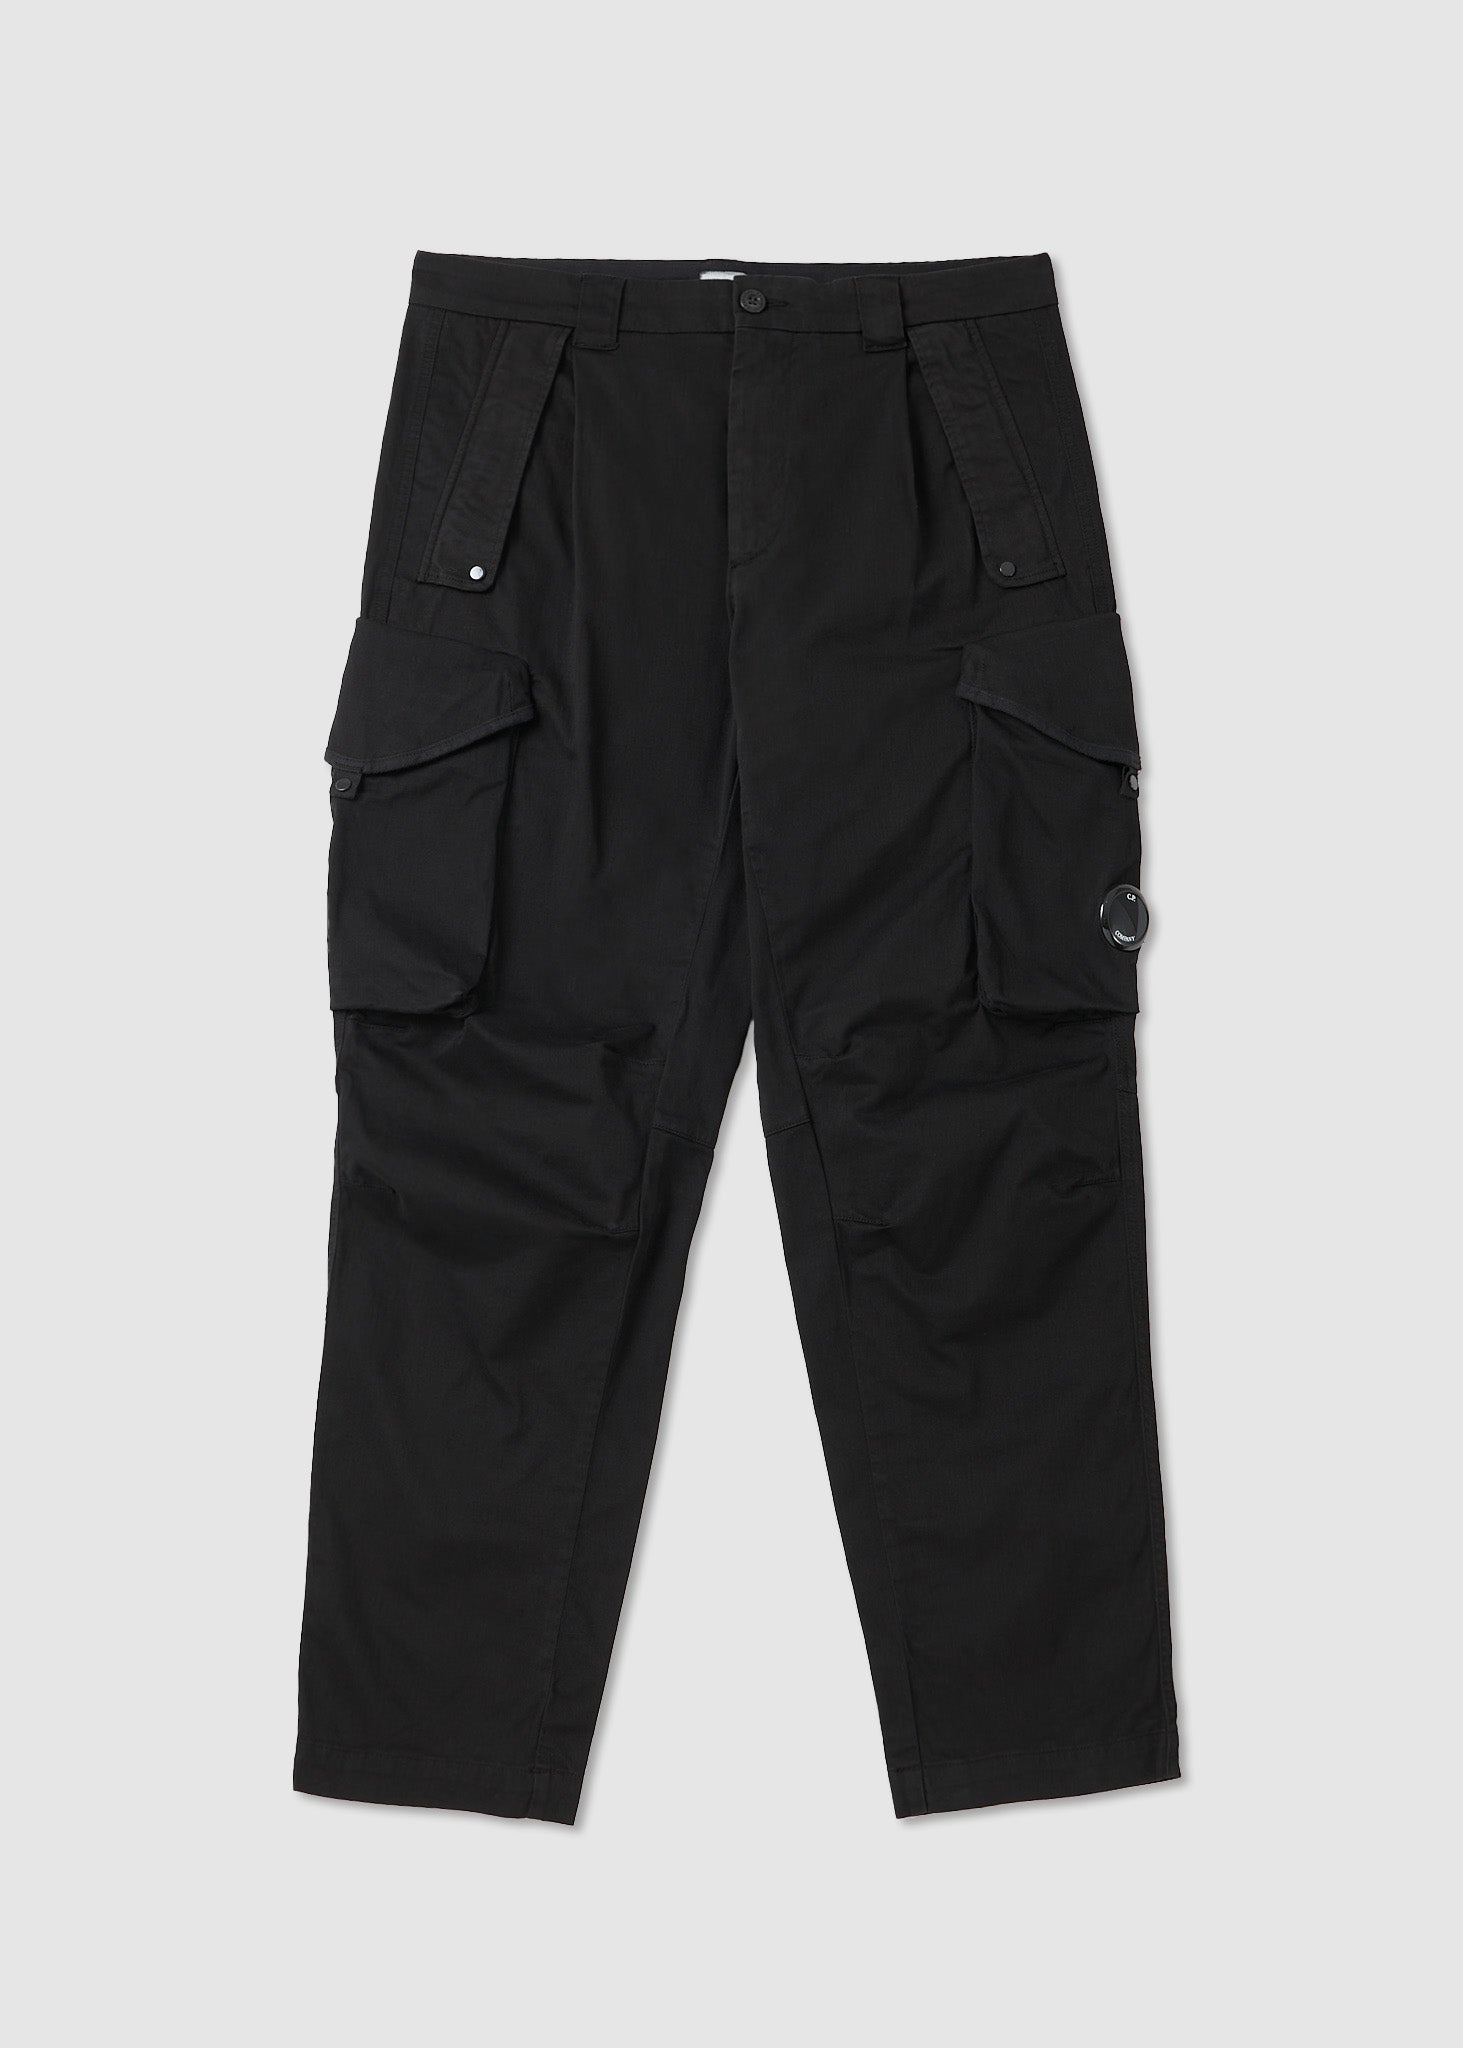 Image of C.P. Company Mens Stretch Sateen Loose Cargo Pants In Black